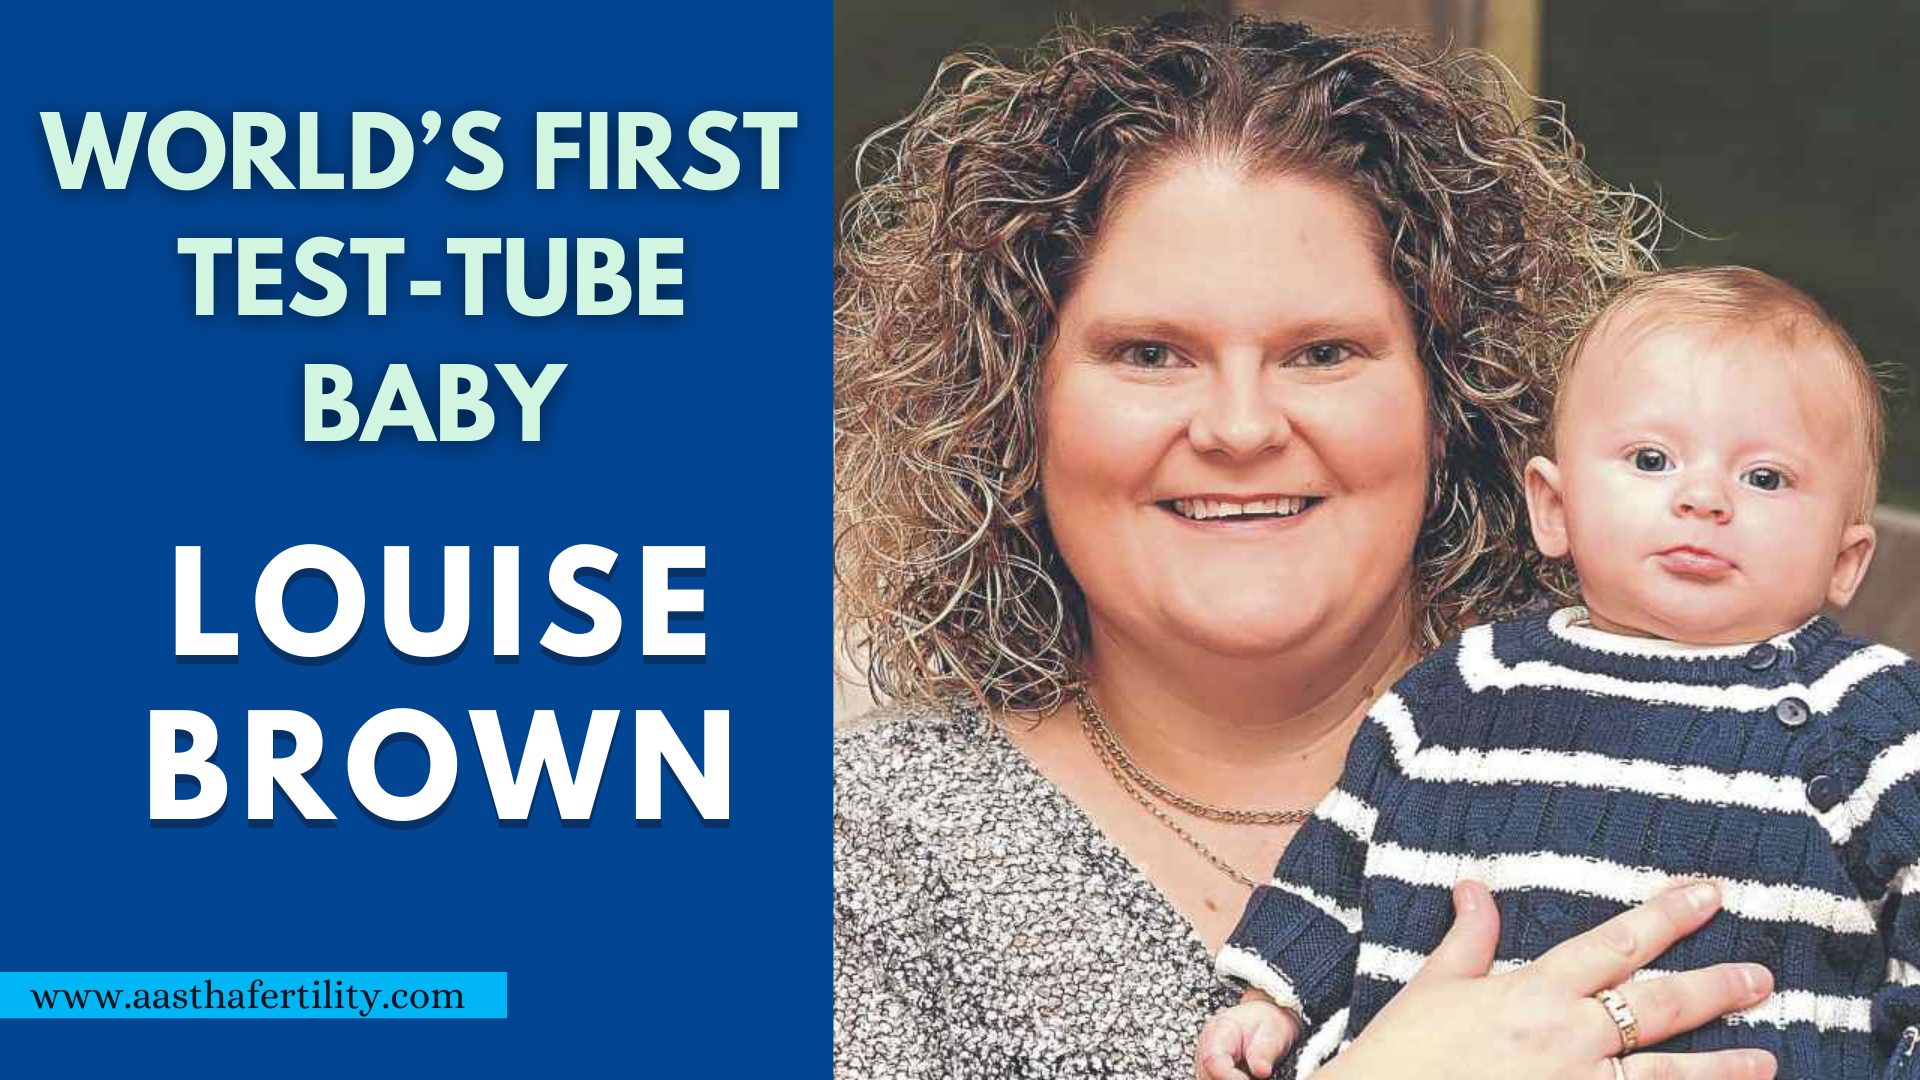 World’s First Test-Tube Baby Louise Brown